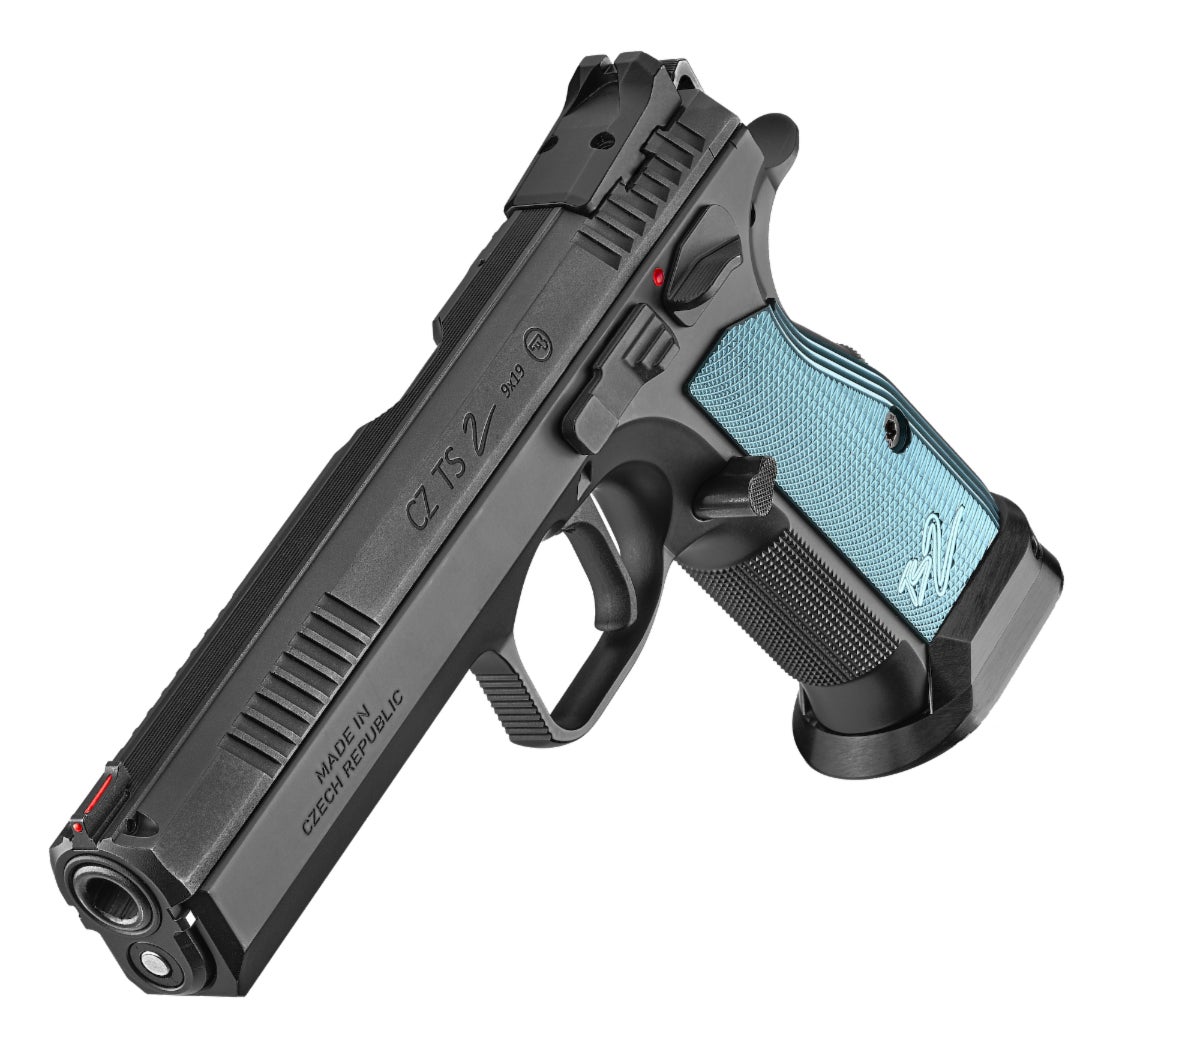 The all-new CZ TS2 competition pistol. (Image © CZ-USA)